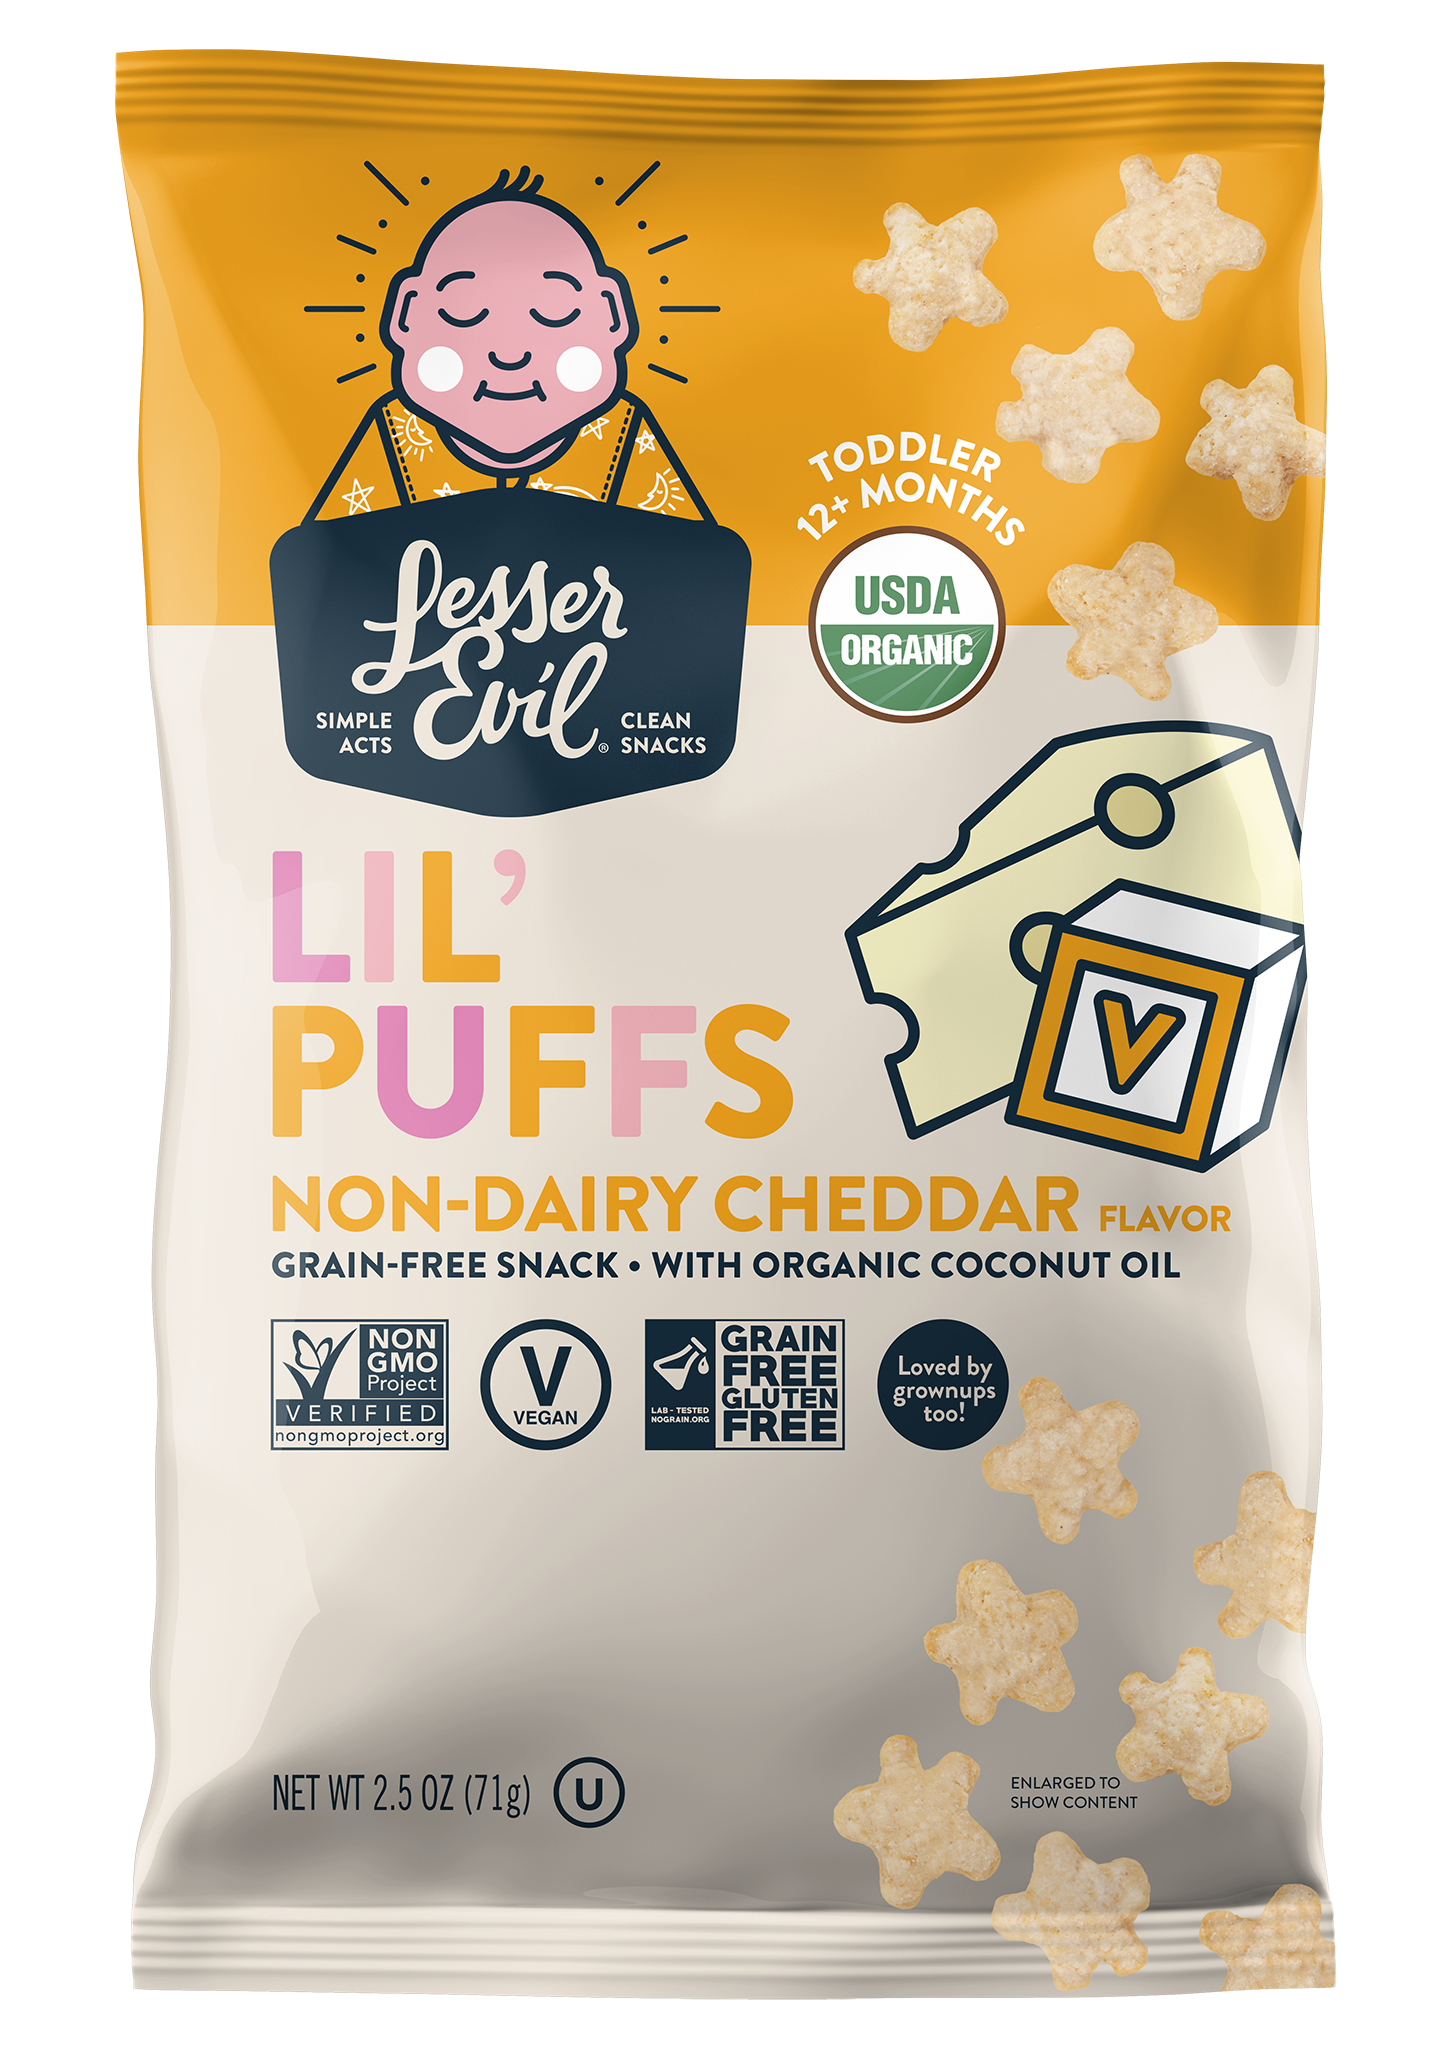 LesserEvil Lil Puffs, non-Dairy Cheddar 4 innerpacks per case 2.5 oz